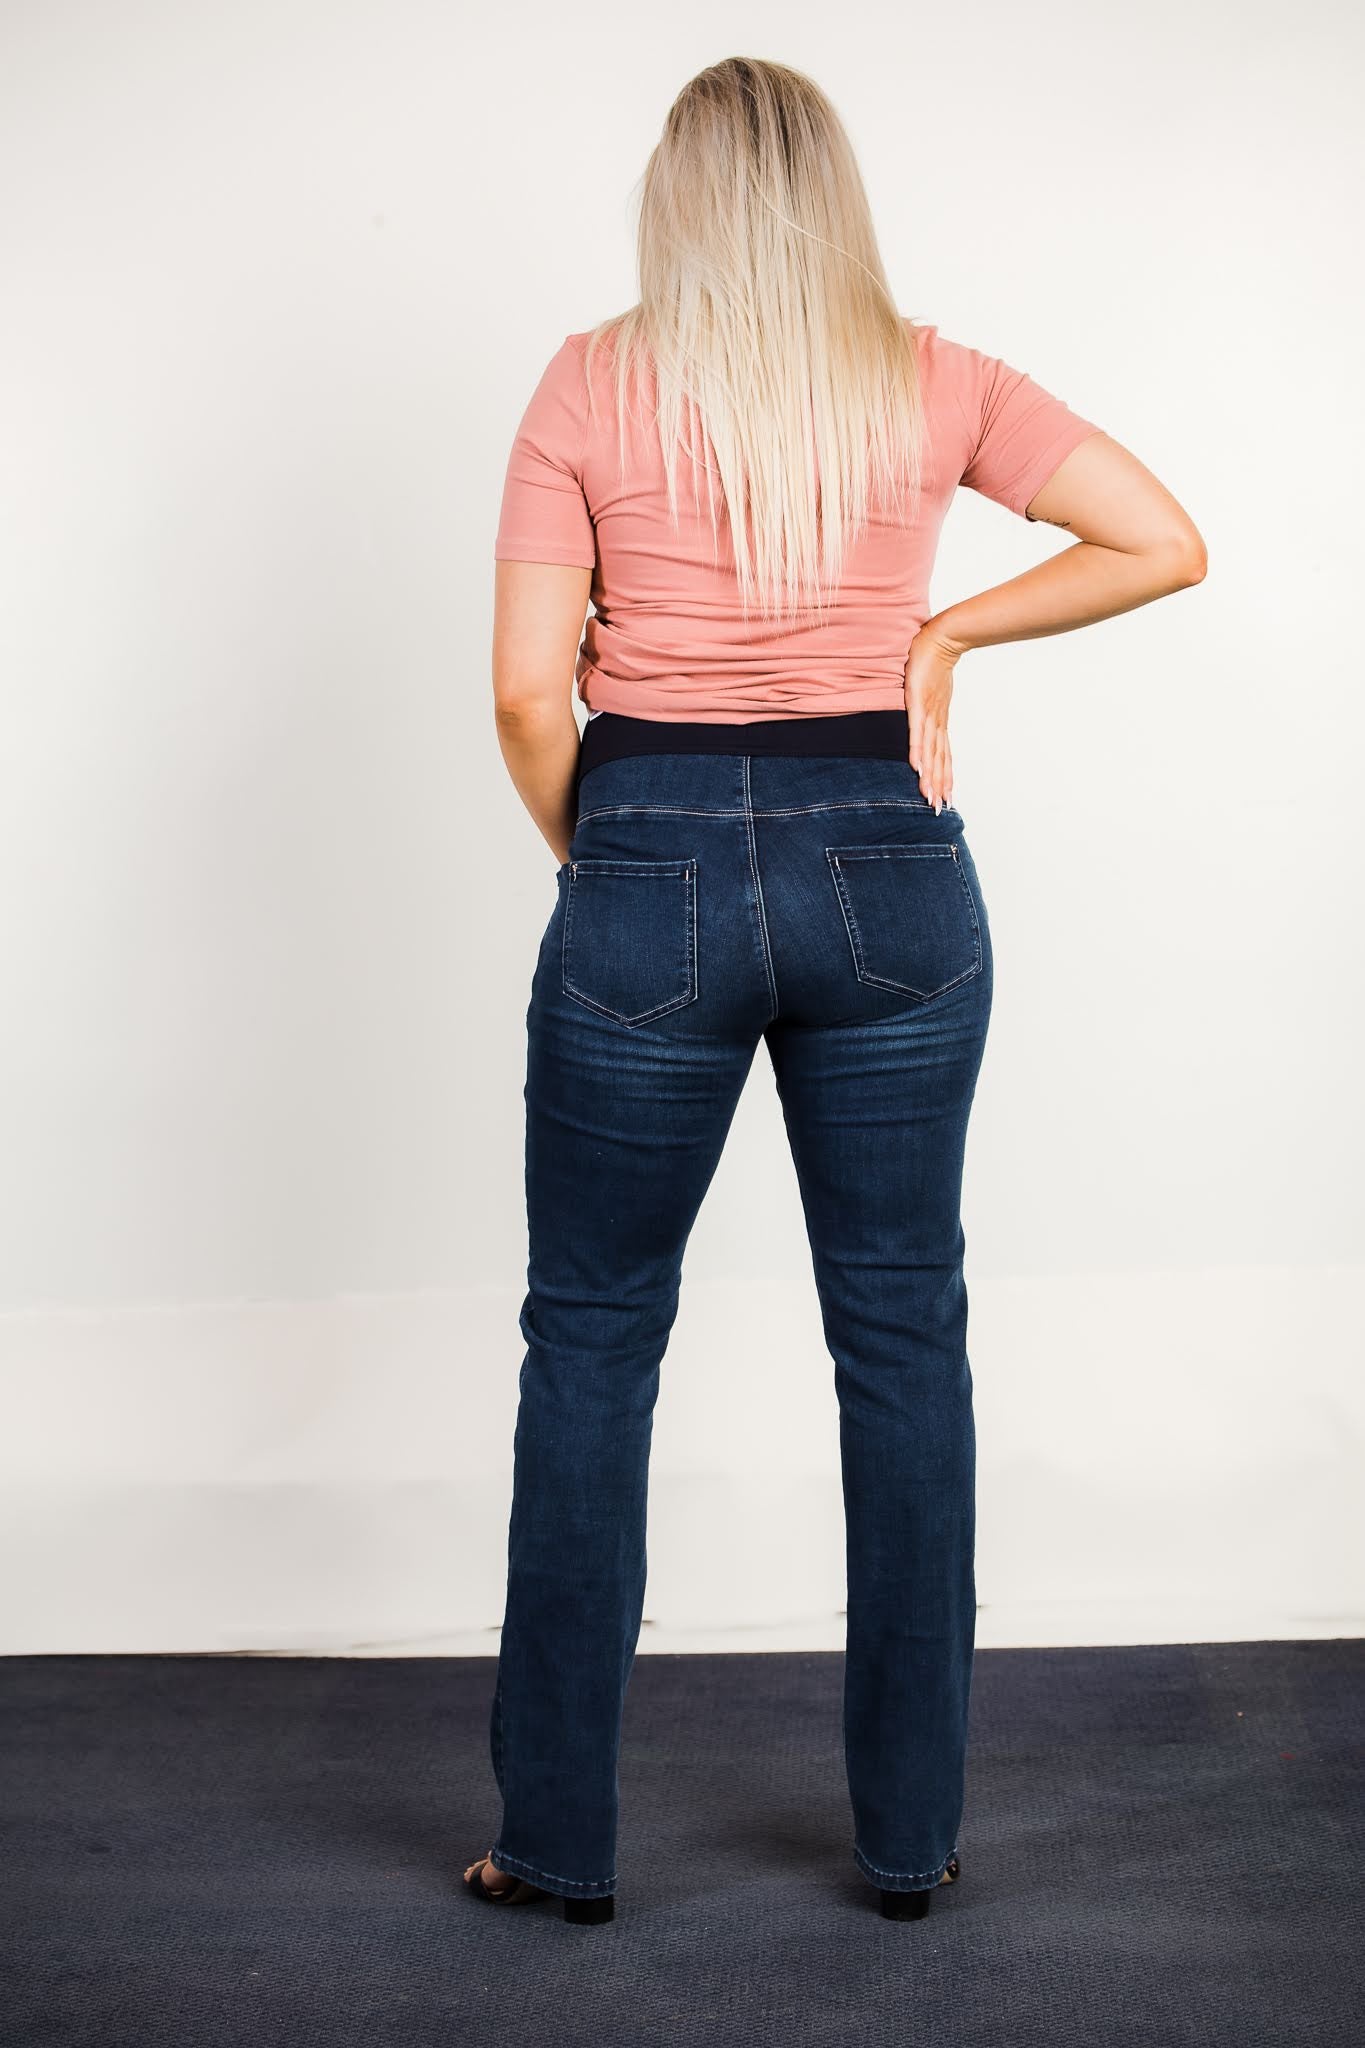 How to Make Maternity Jeans